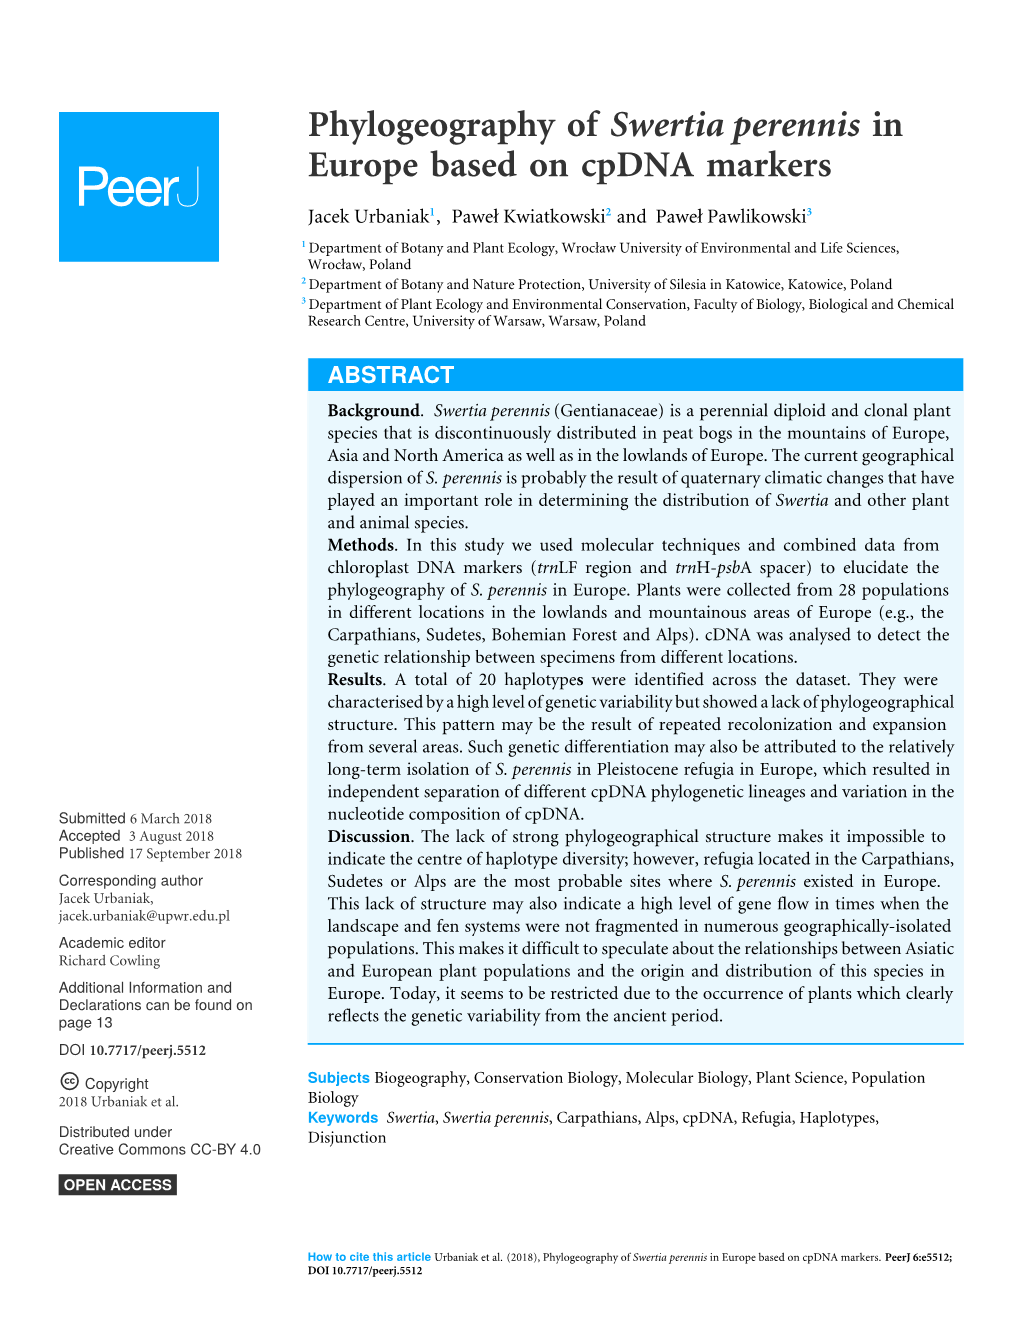 Phylogeography of Swertia Perennis in Europe Based on Cpdna Markers